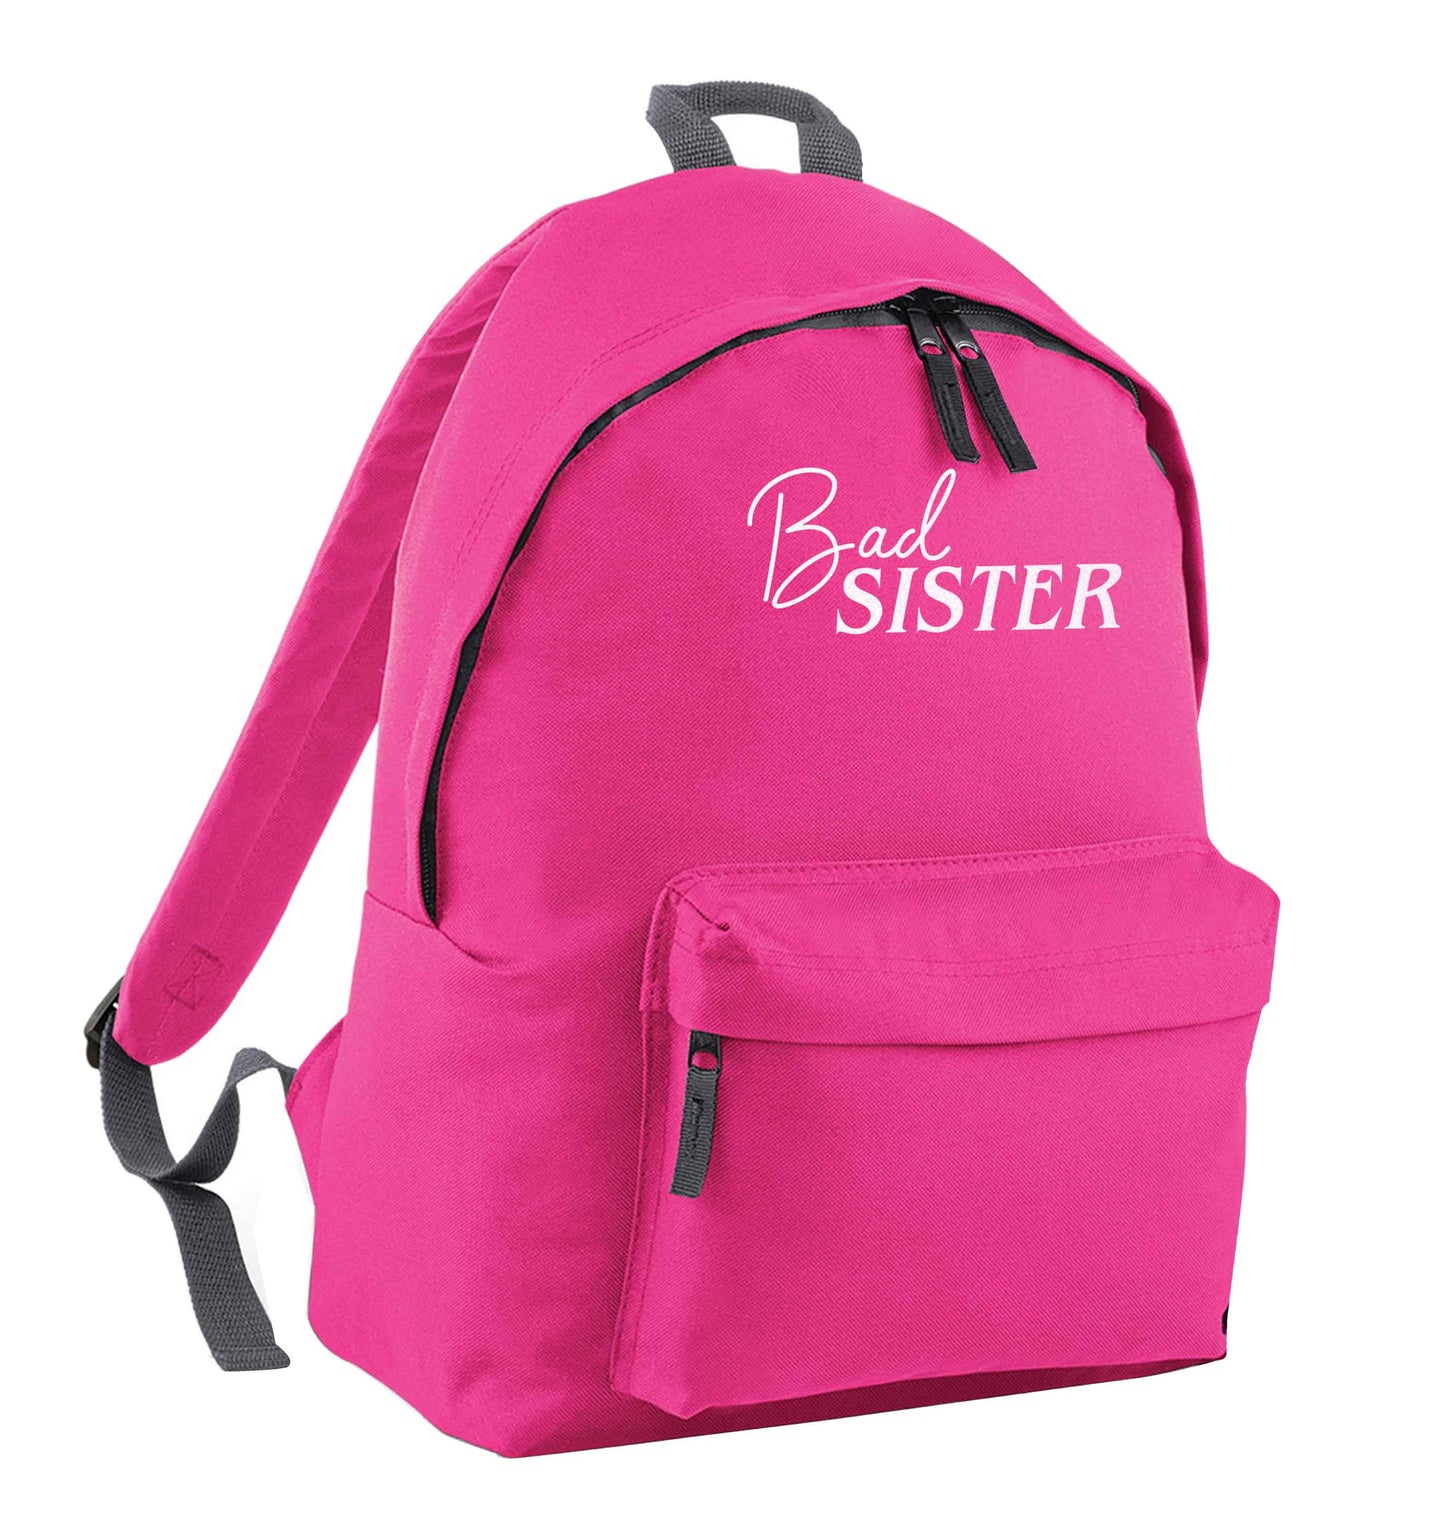 Bad sister pink adults backpack